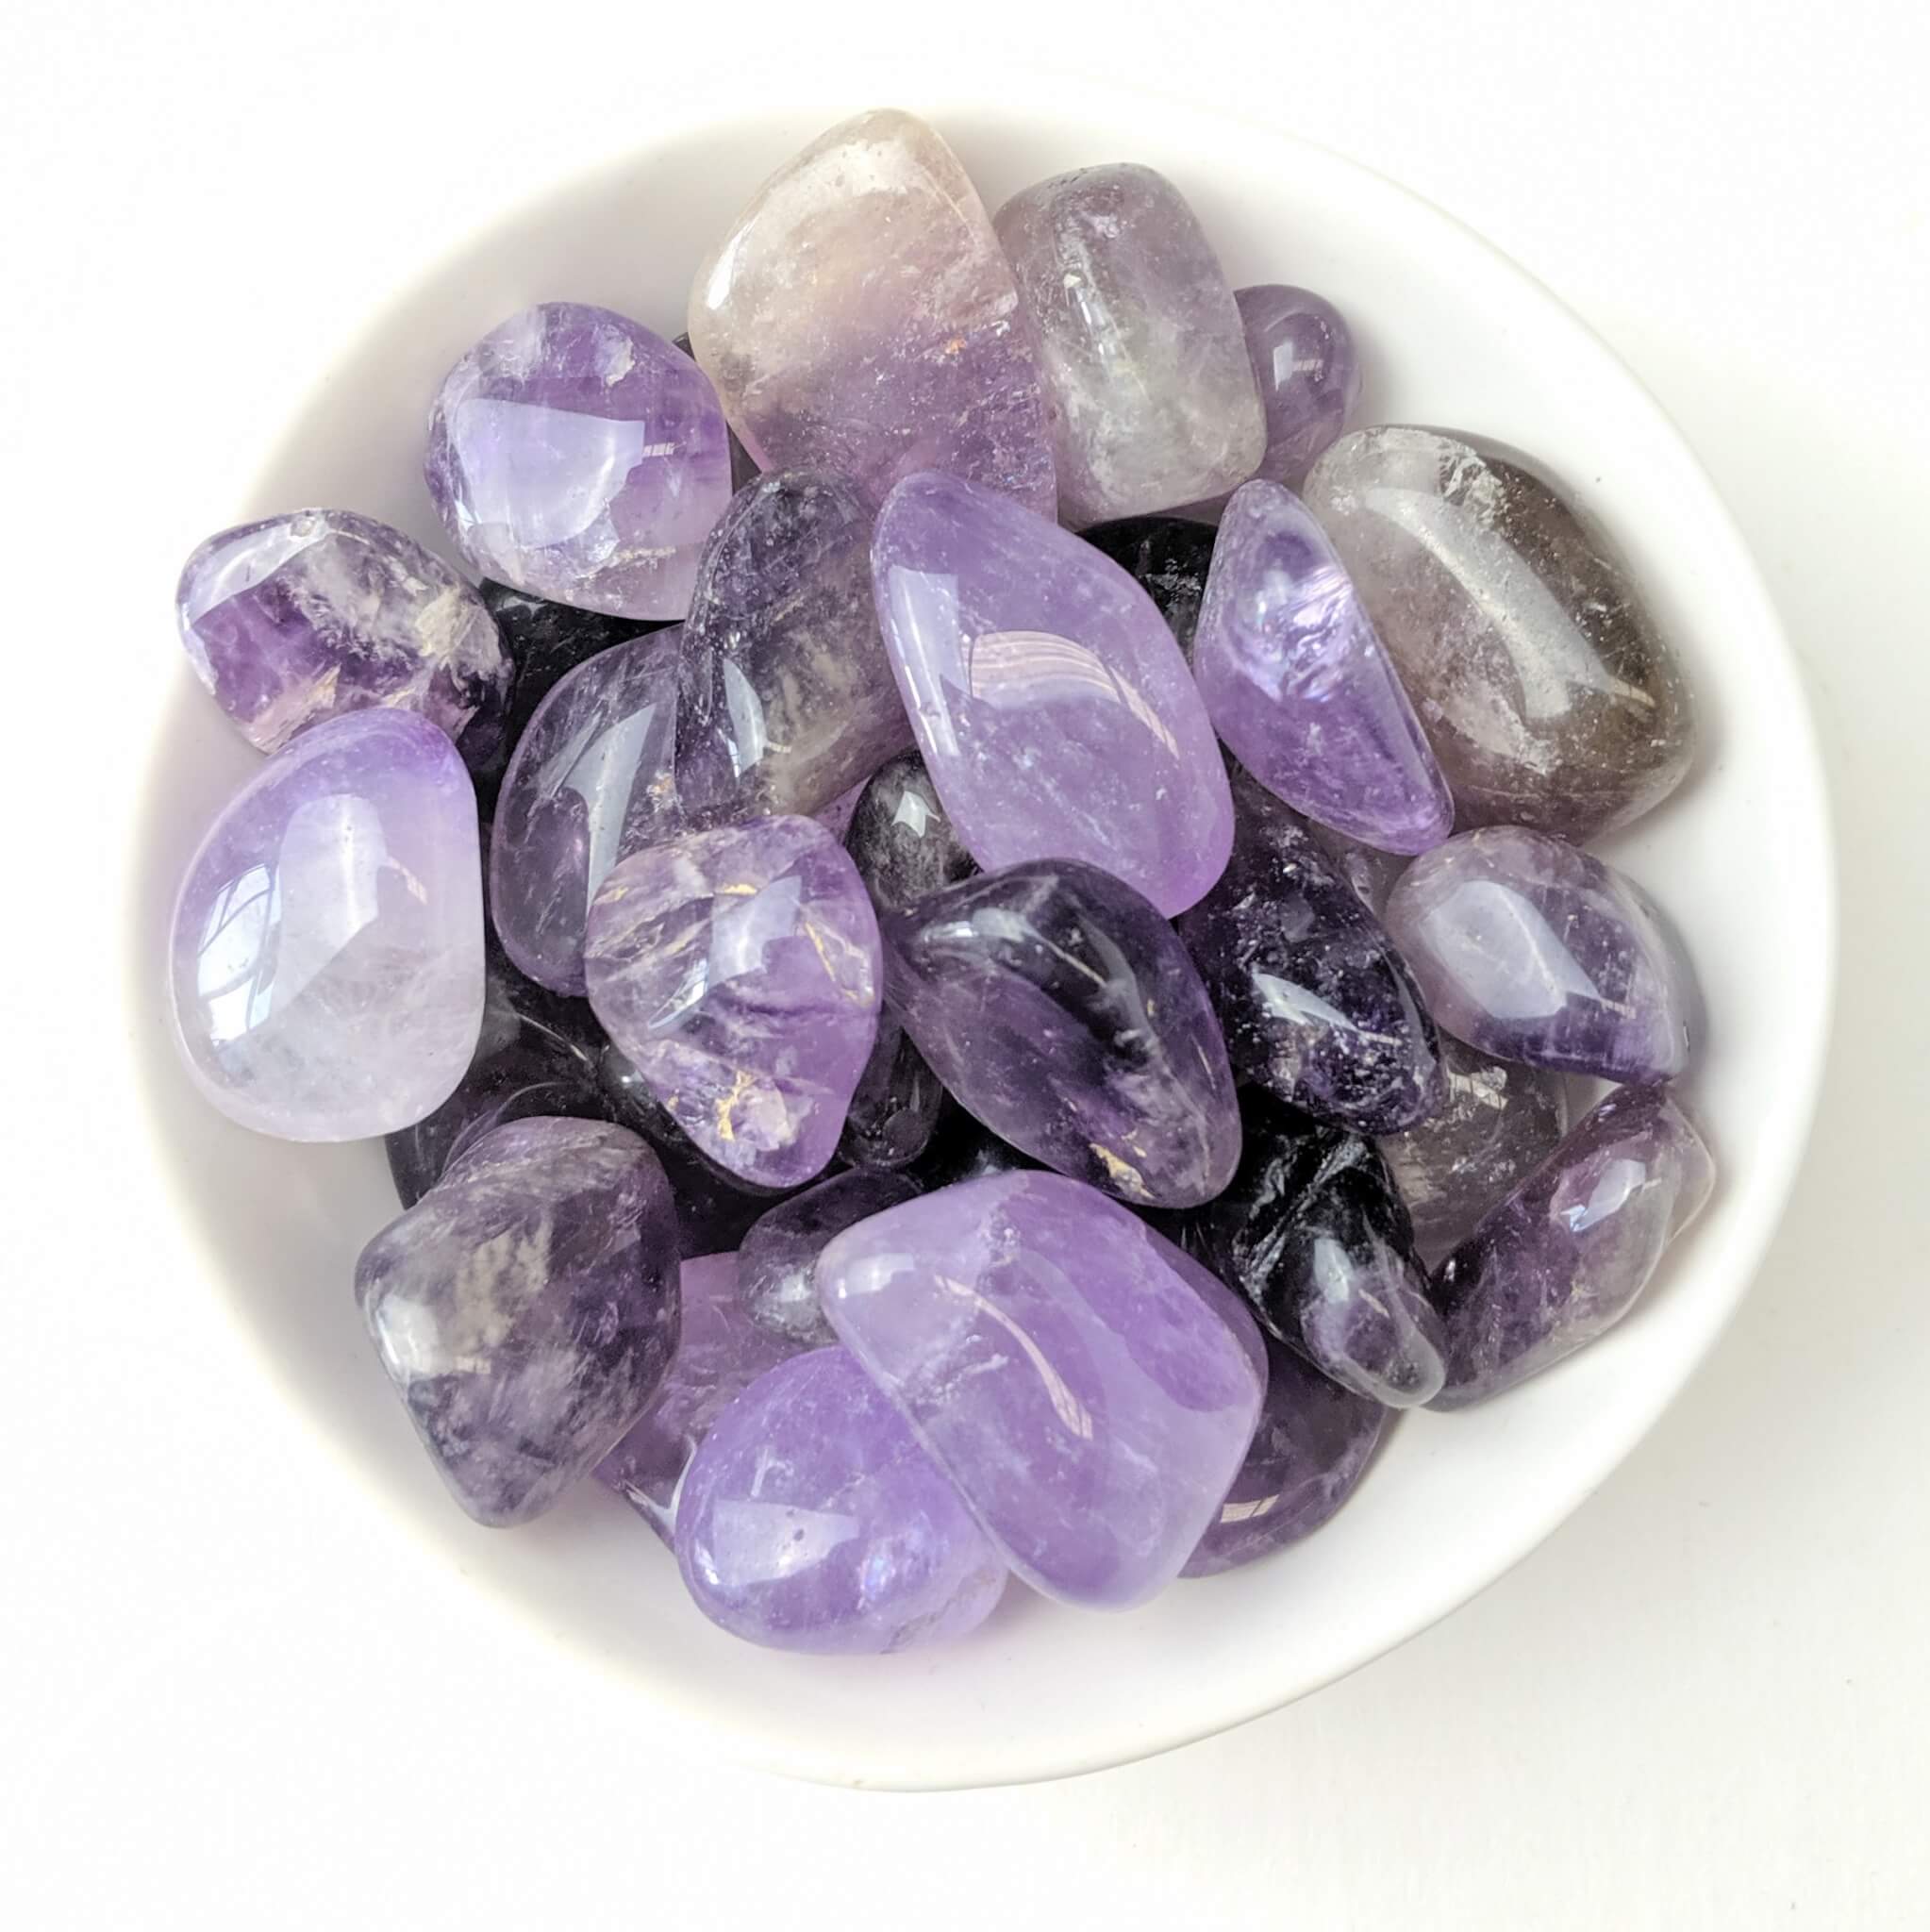 Amethyst Crystal Tumble Stones in a White Bowl Top View